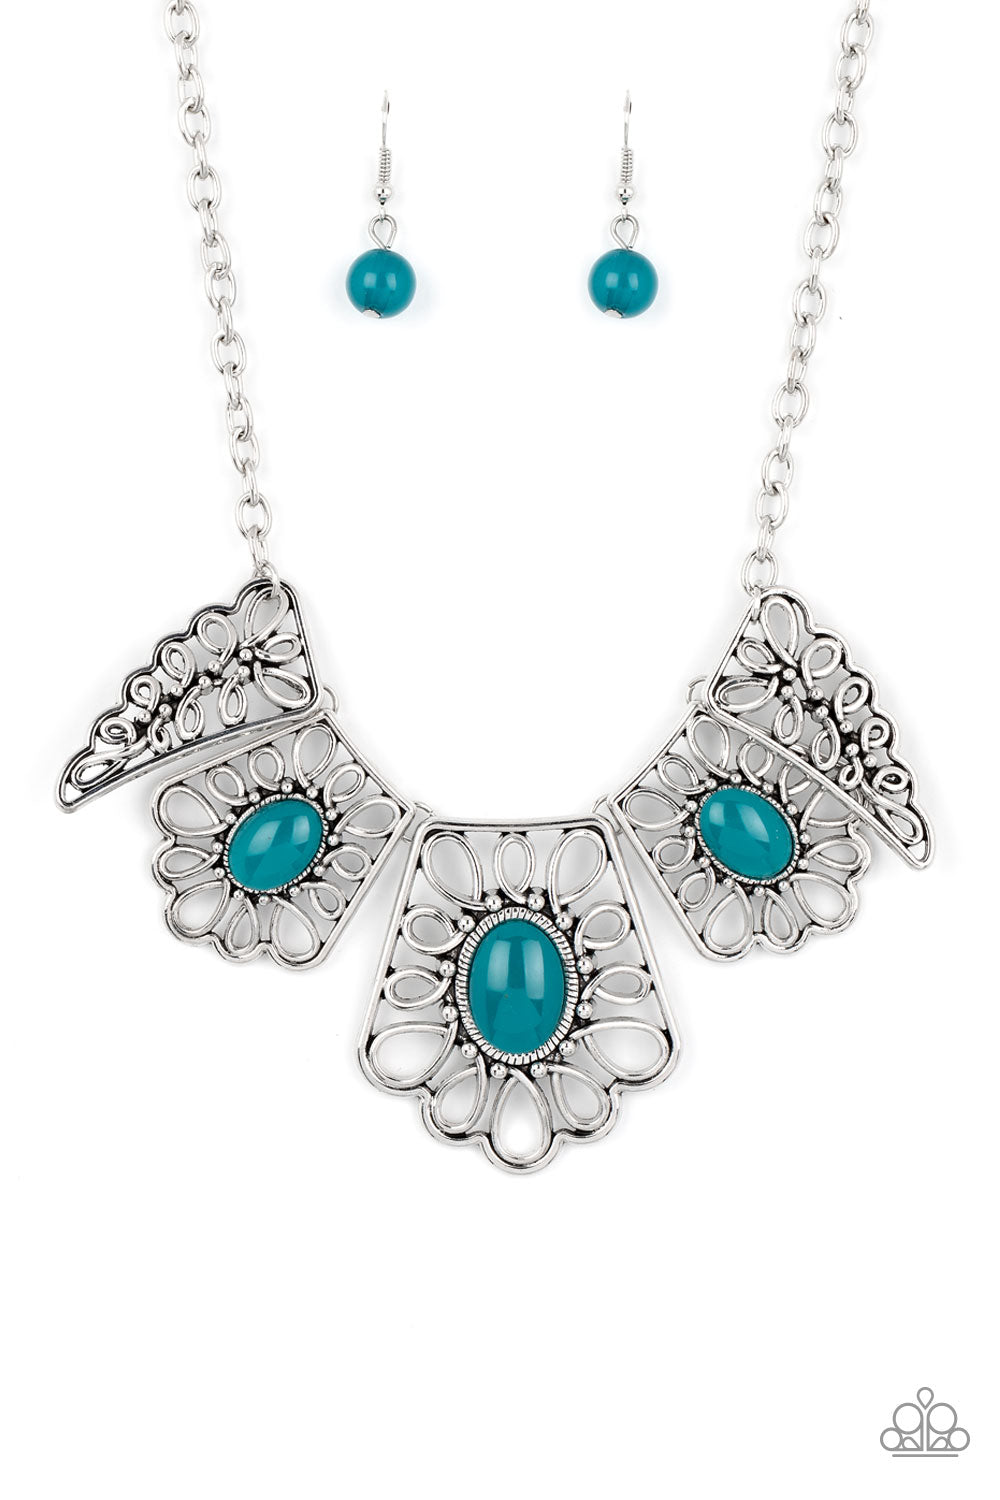 Paparazzi Necklaces - Glimmering Groves - Blue